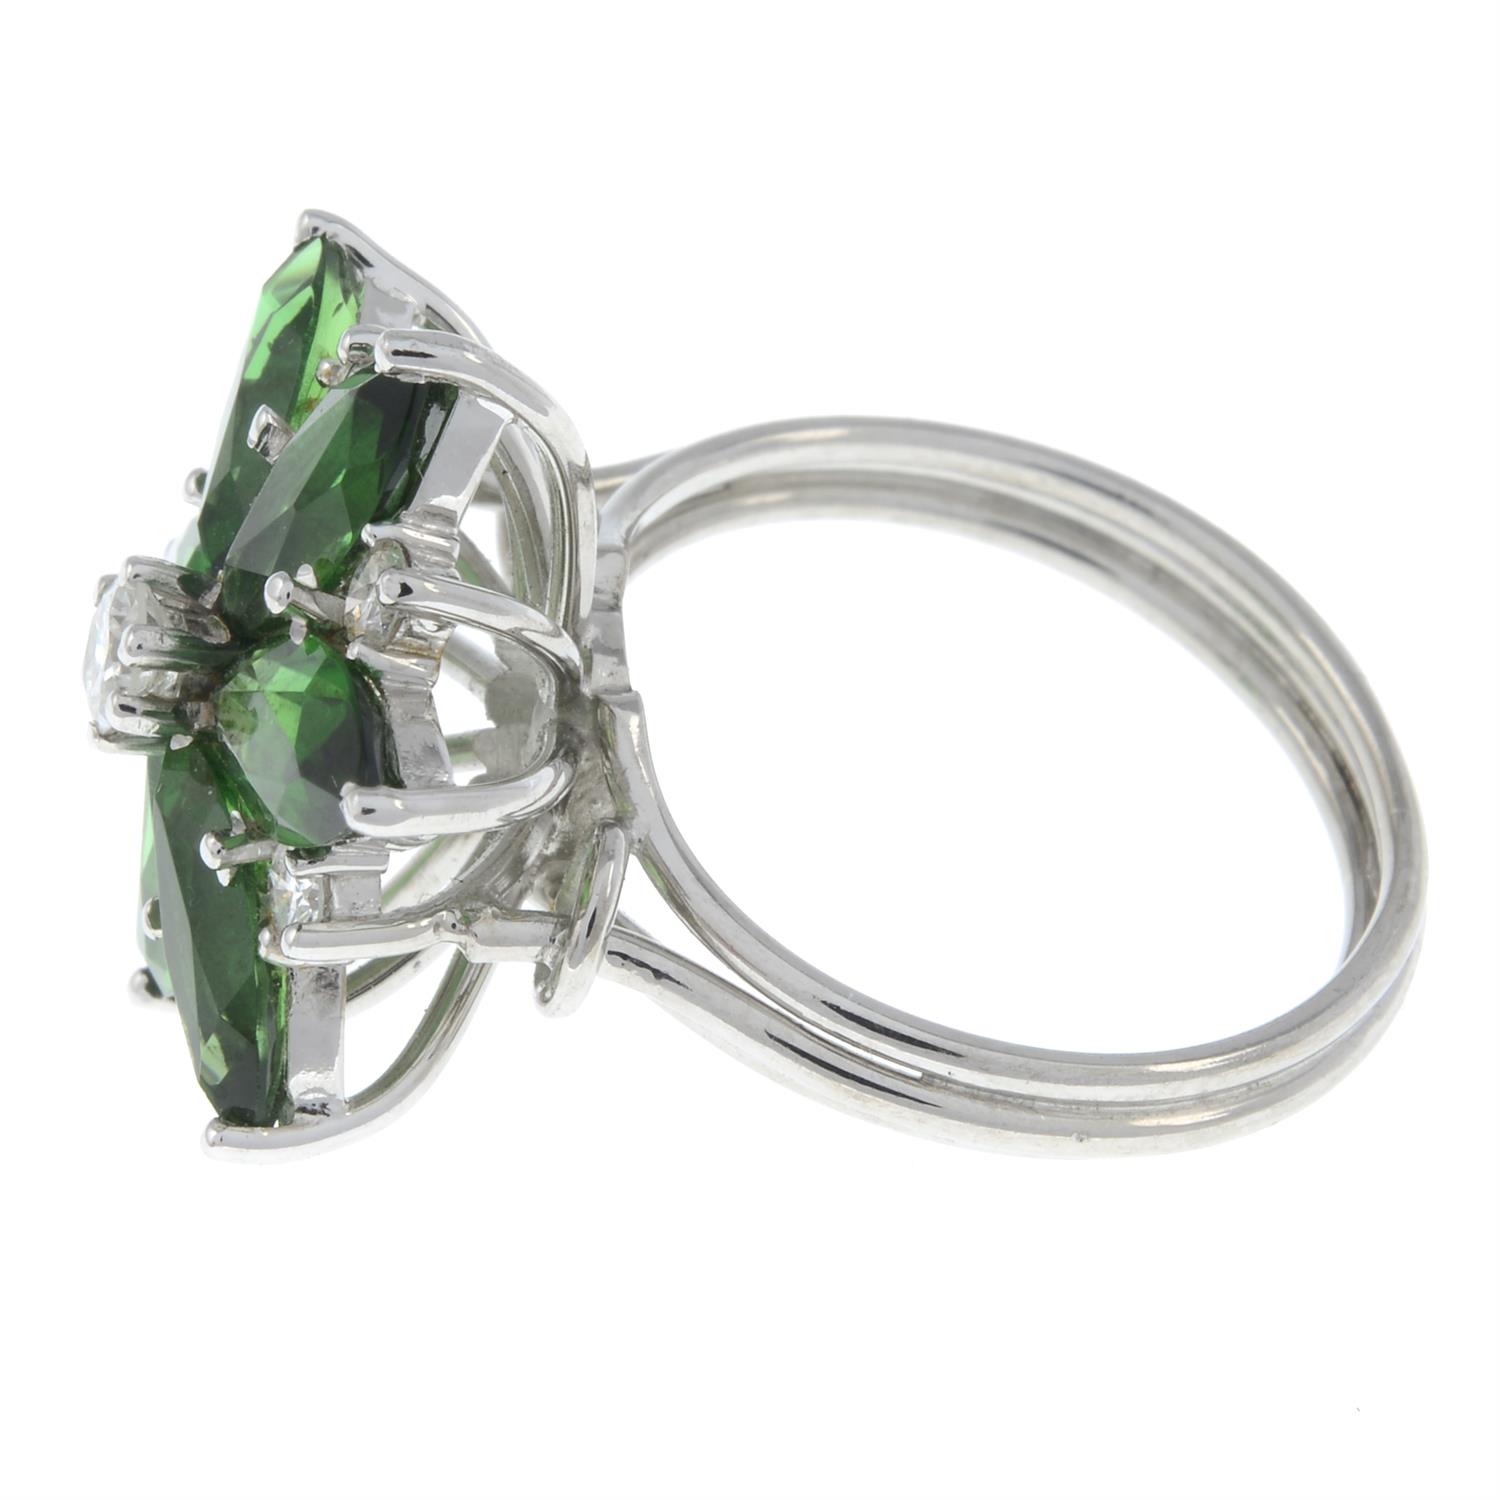 Diamond and green gem floral cluster ring - Image 4 of 5